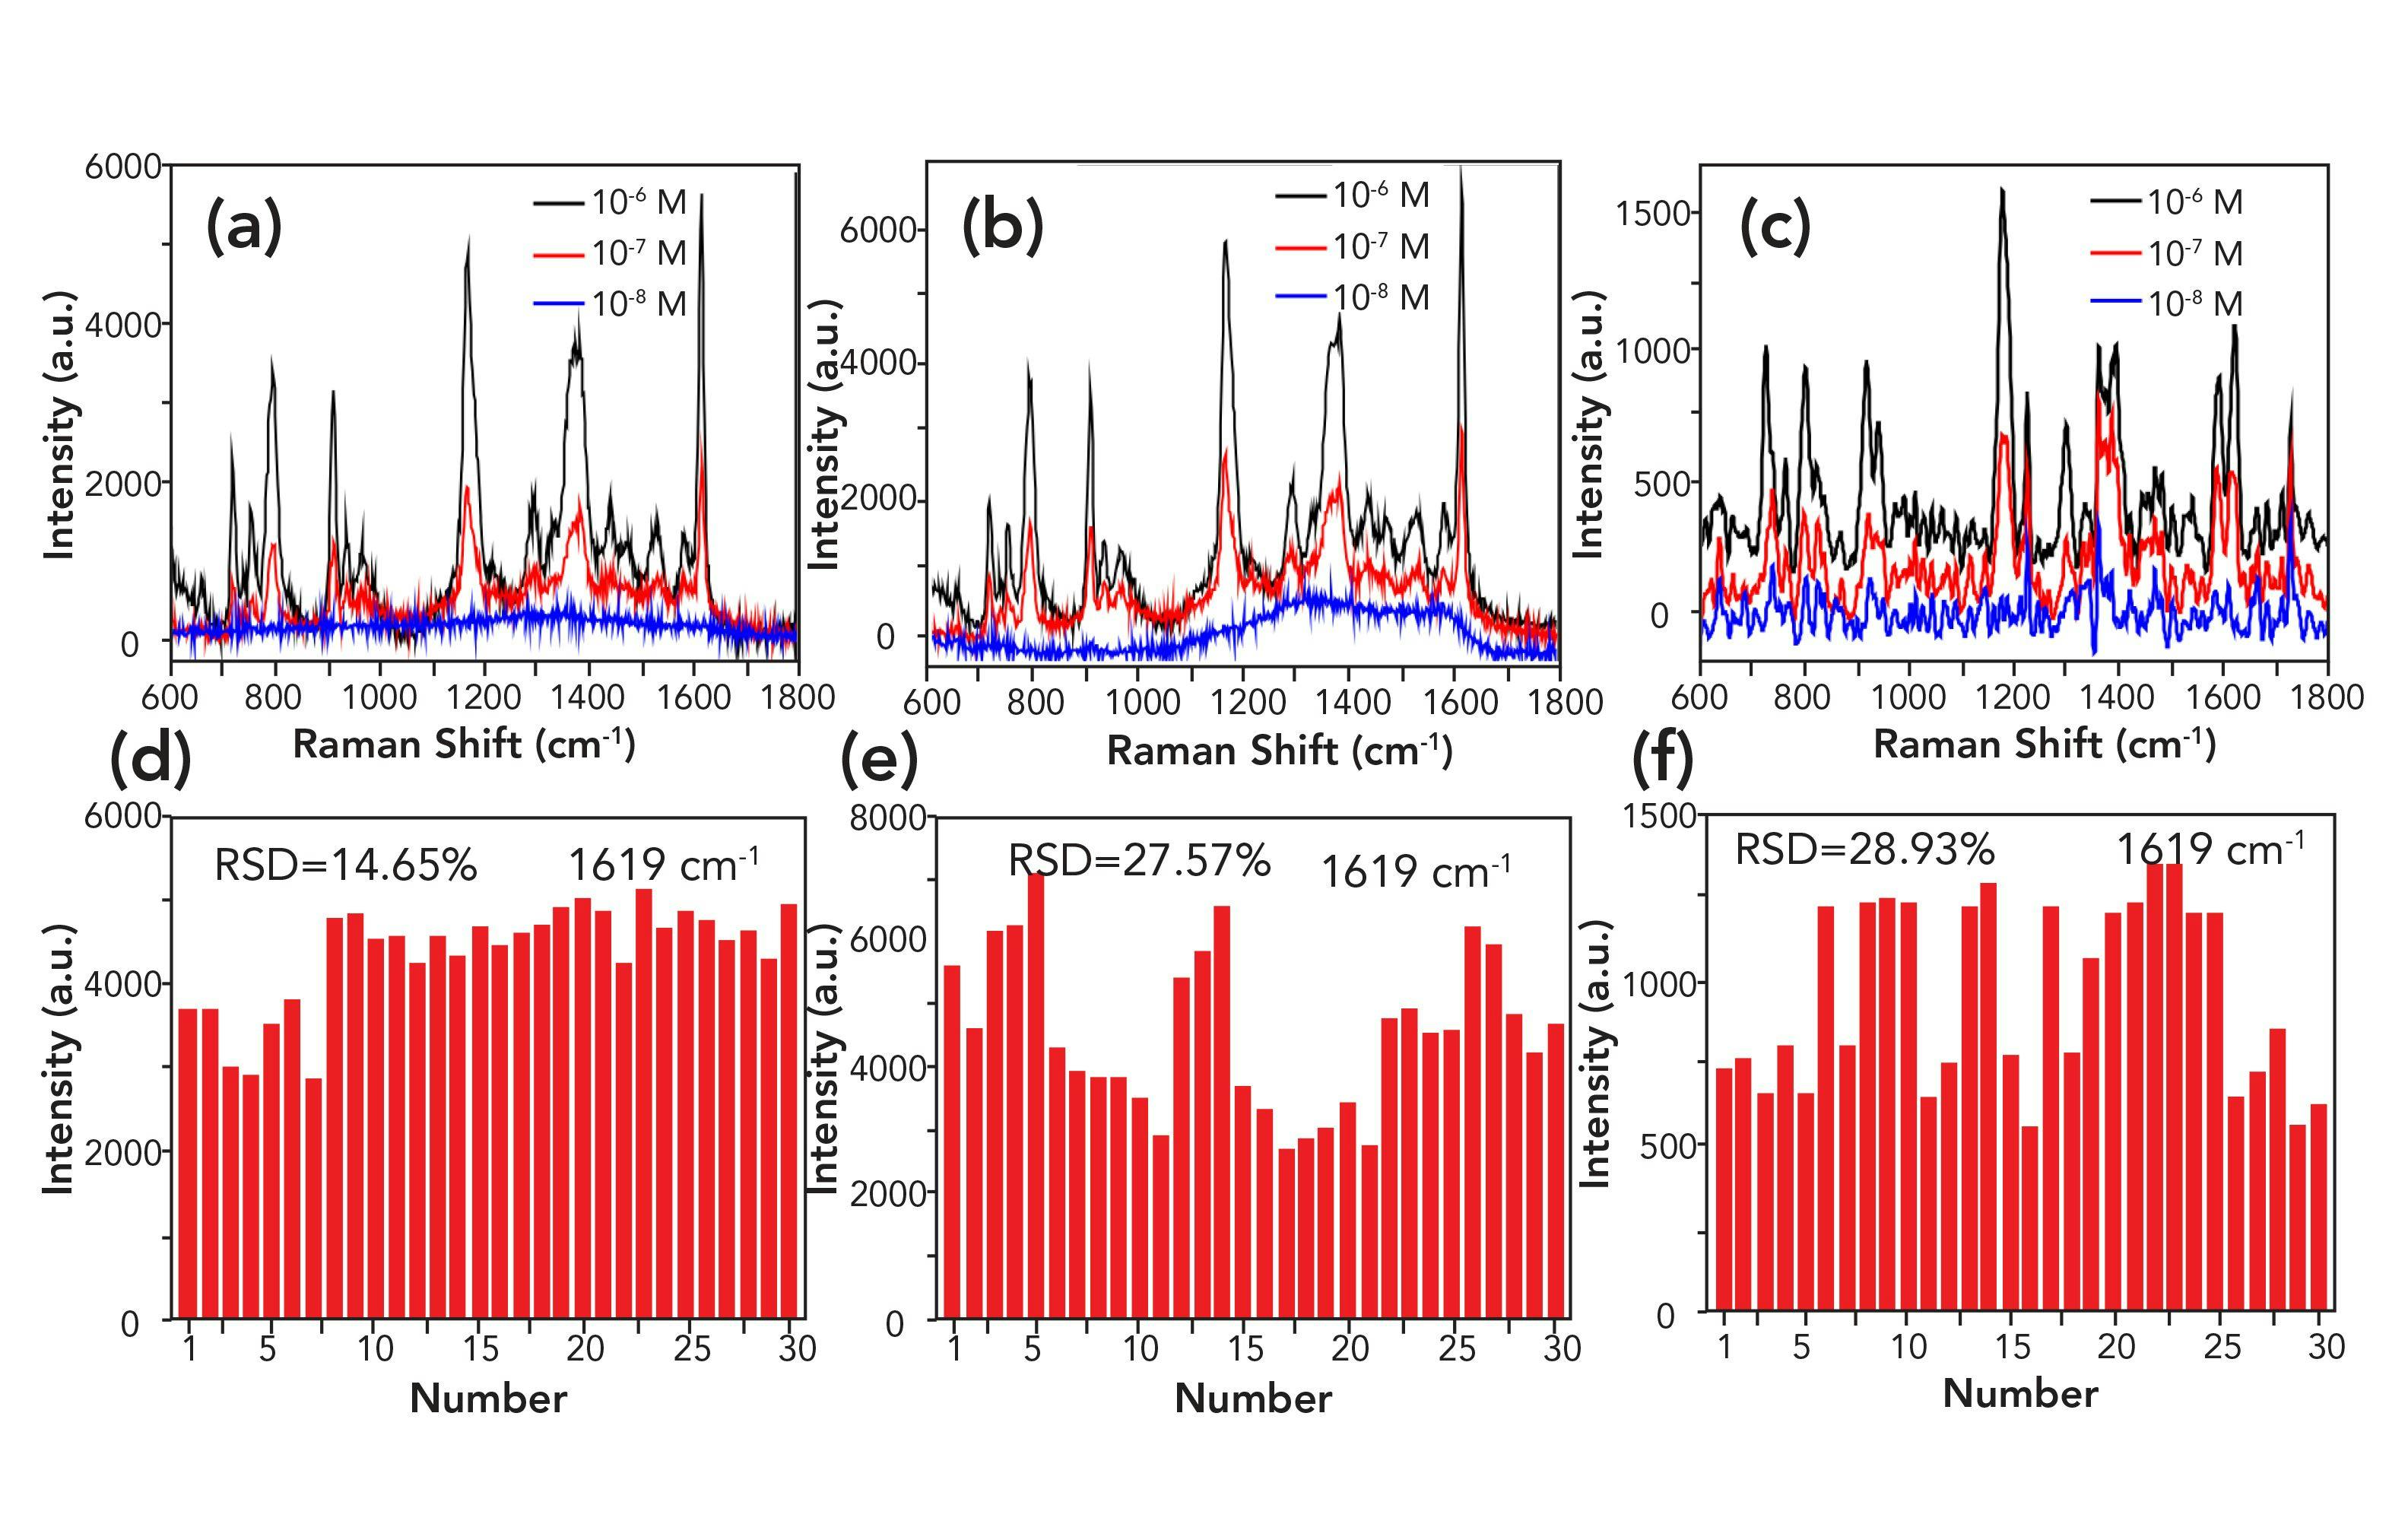 FIGURE 3: SERS spectra of CV, at different concentrations, collected on three gold nanoparticles with (a) E1, (b) E2, and (c) E3. (d–f) Respective RSDs of the main CV (10−6 M) vibration at 1619 cm−1 intensities determined for 30 spot locations.